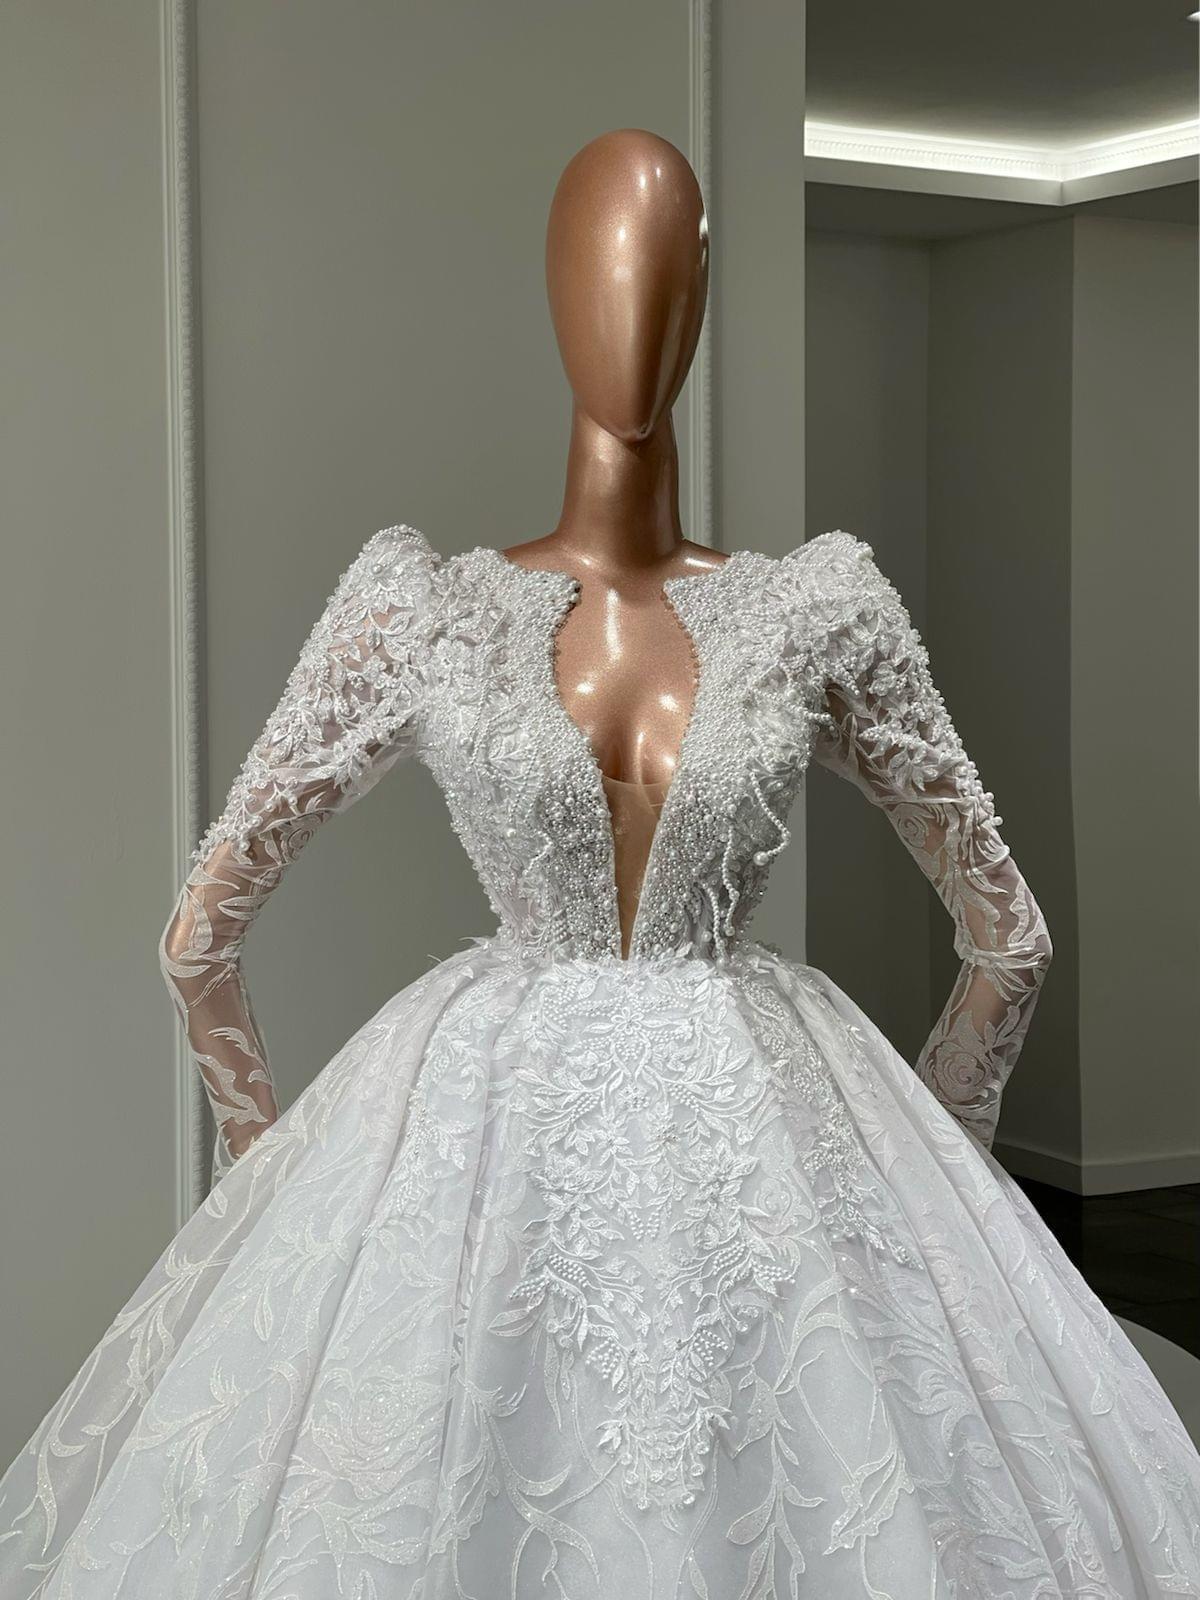 Long Sleeve High Neckline Lace Fit And Flare Wedding Dress With Bow And Puff  Sleeves | Kleinfeld Bridal